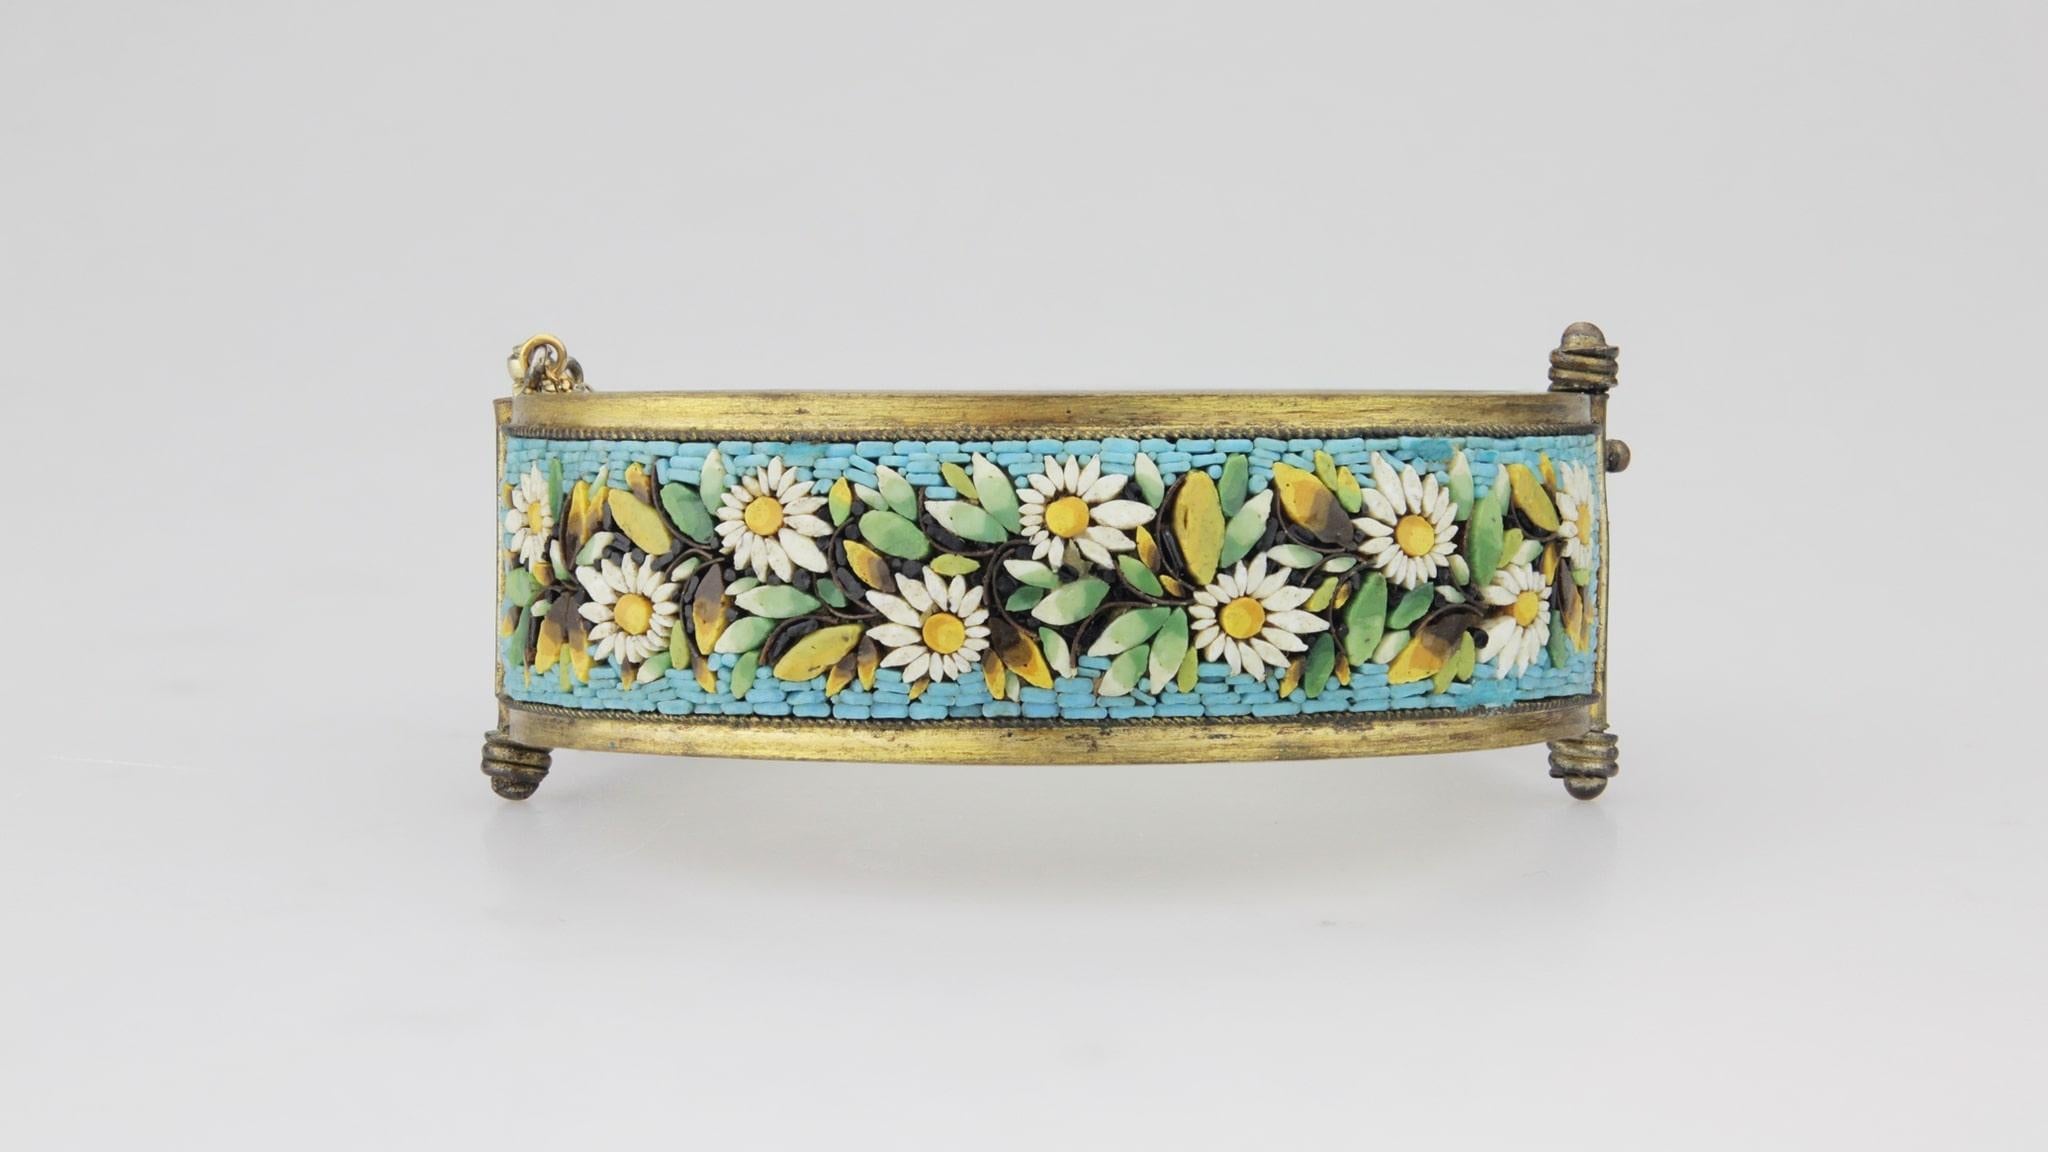 A fine Victorian micro mosaic bracelet with a day and night garden motif. The condition of this particular bracelet is exceptional with all tesserae in tact and only a little wear to the gilt metal finish. The bracelet features a safety chain and a